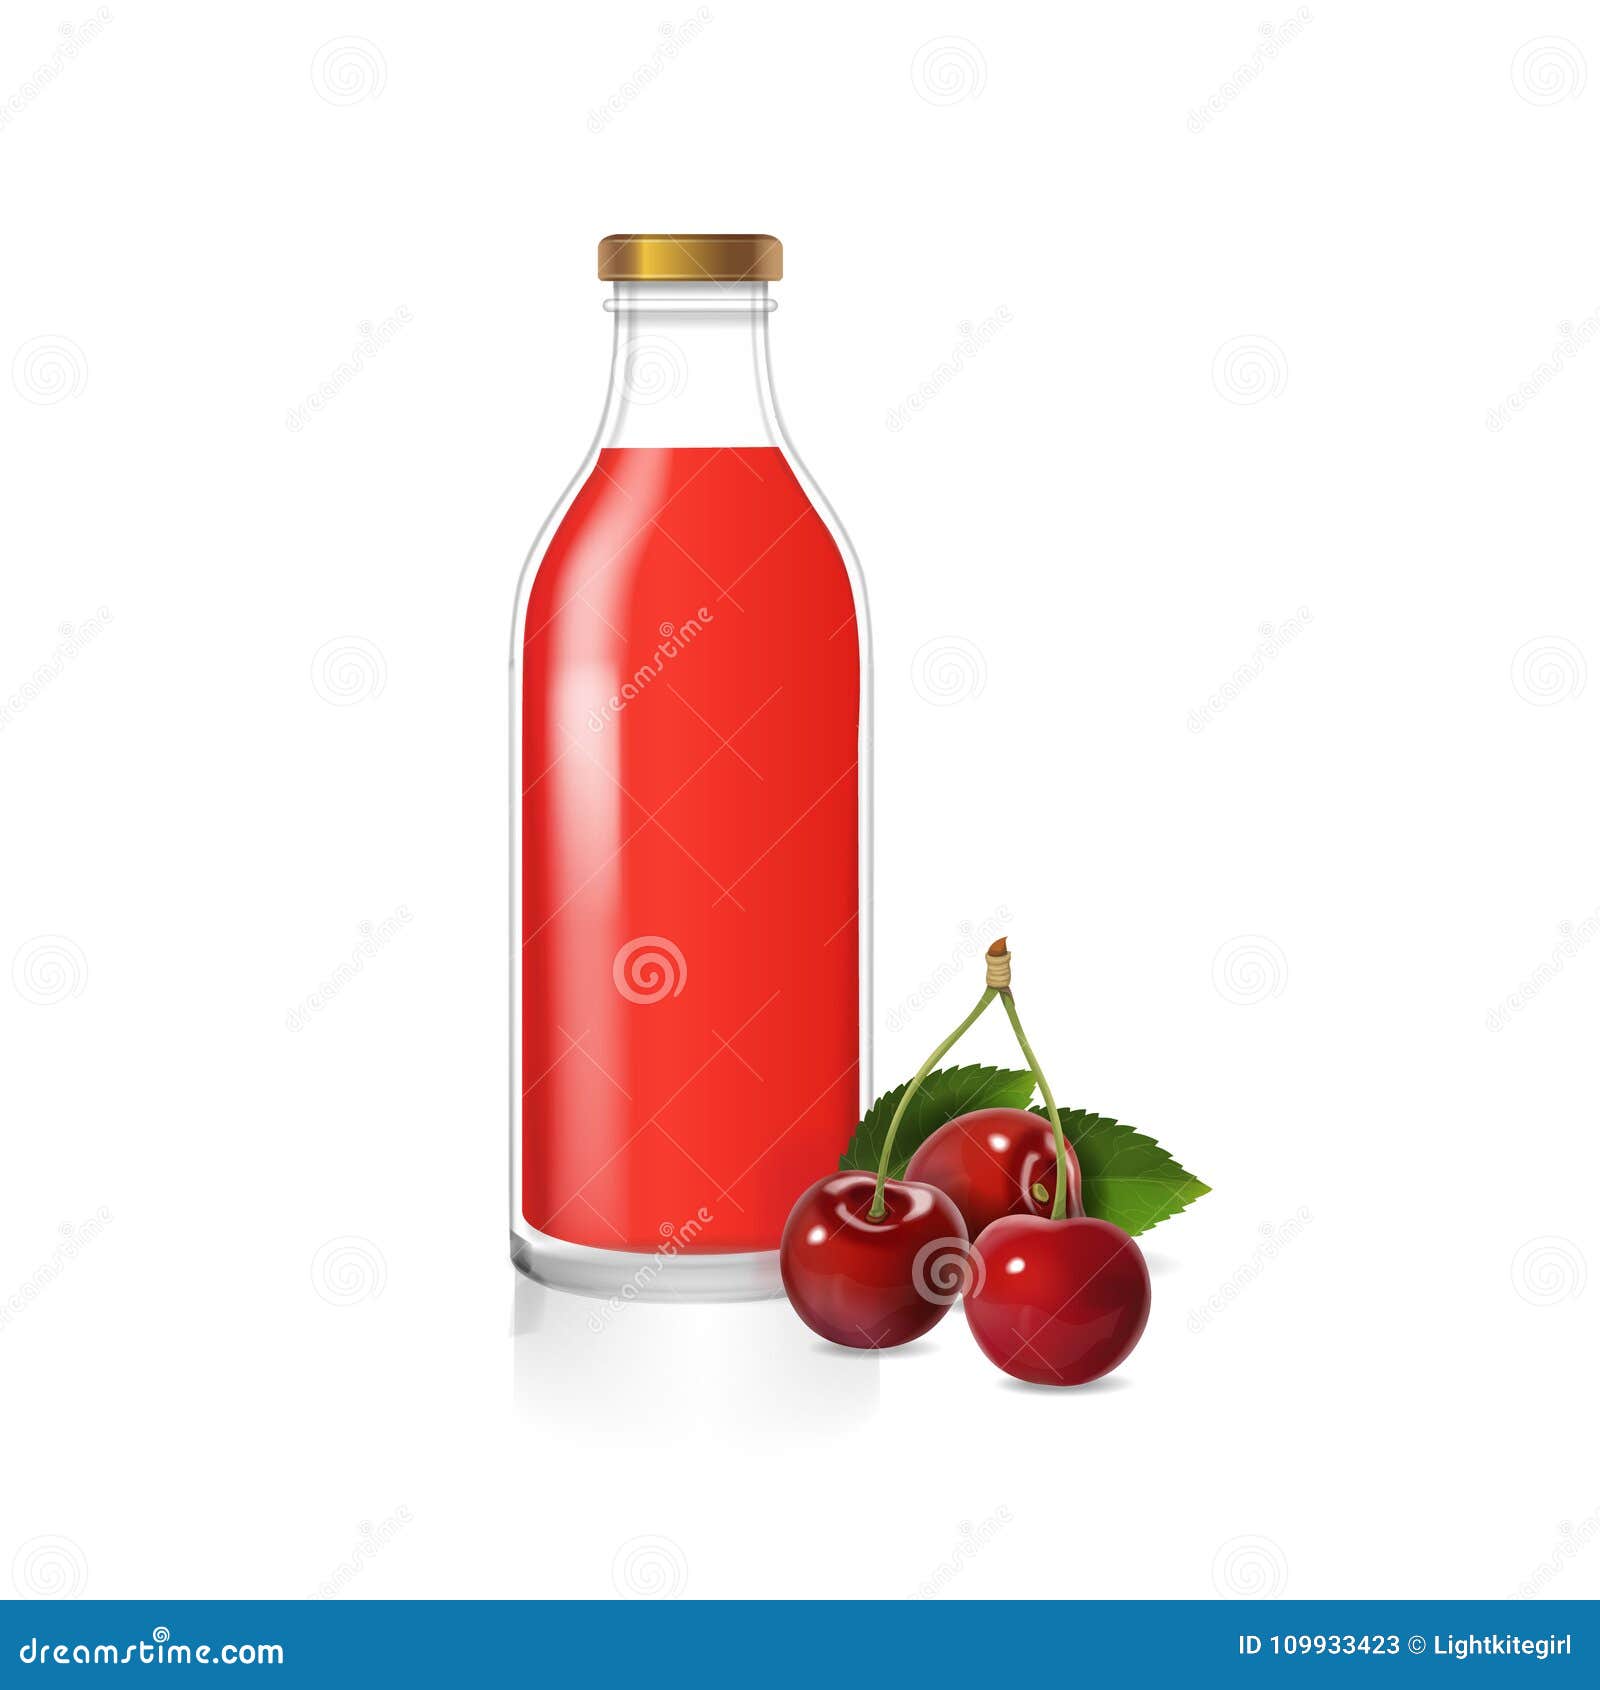 Download Cherry Juice Bottle Stock Illustrations 1 026 Cherry Juice Bottle Stock Illustrations Vectors Clipart Dreamstime Yellowimages Mockups